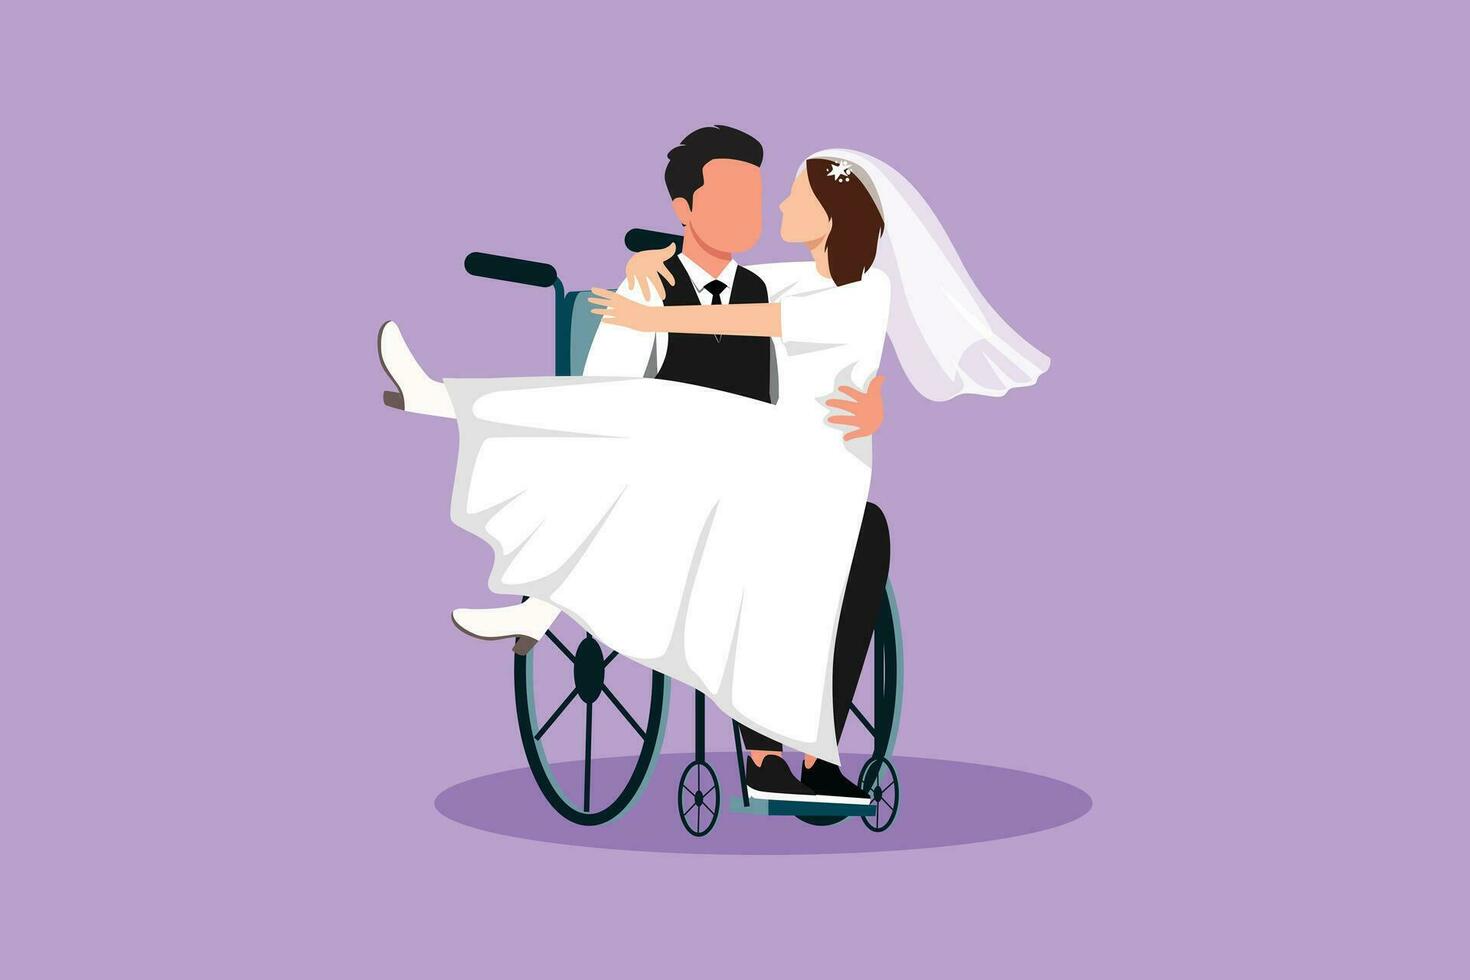 Cartoon flat style drawing disabled man carrying woman in wheelchair with dress. Happy couple at wedding celebration. Happy family. Positive man with special needs. Graphic design vector illustration